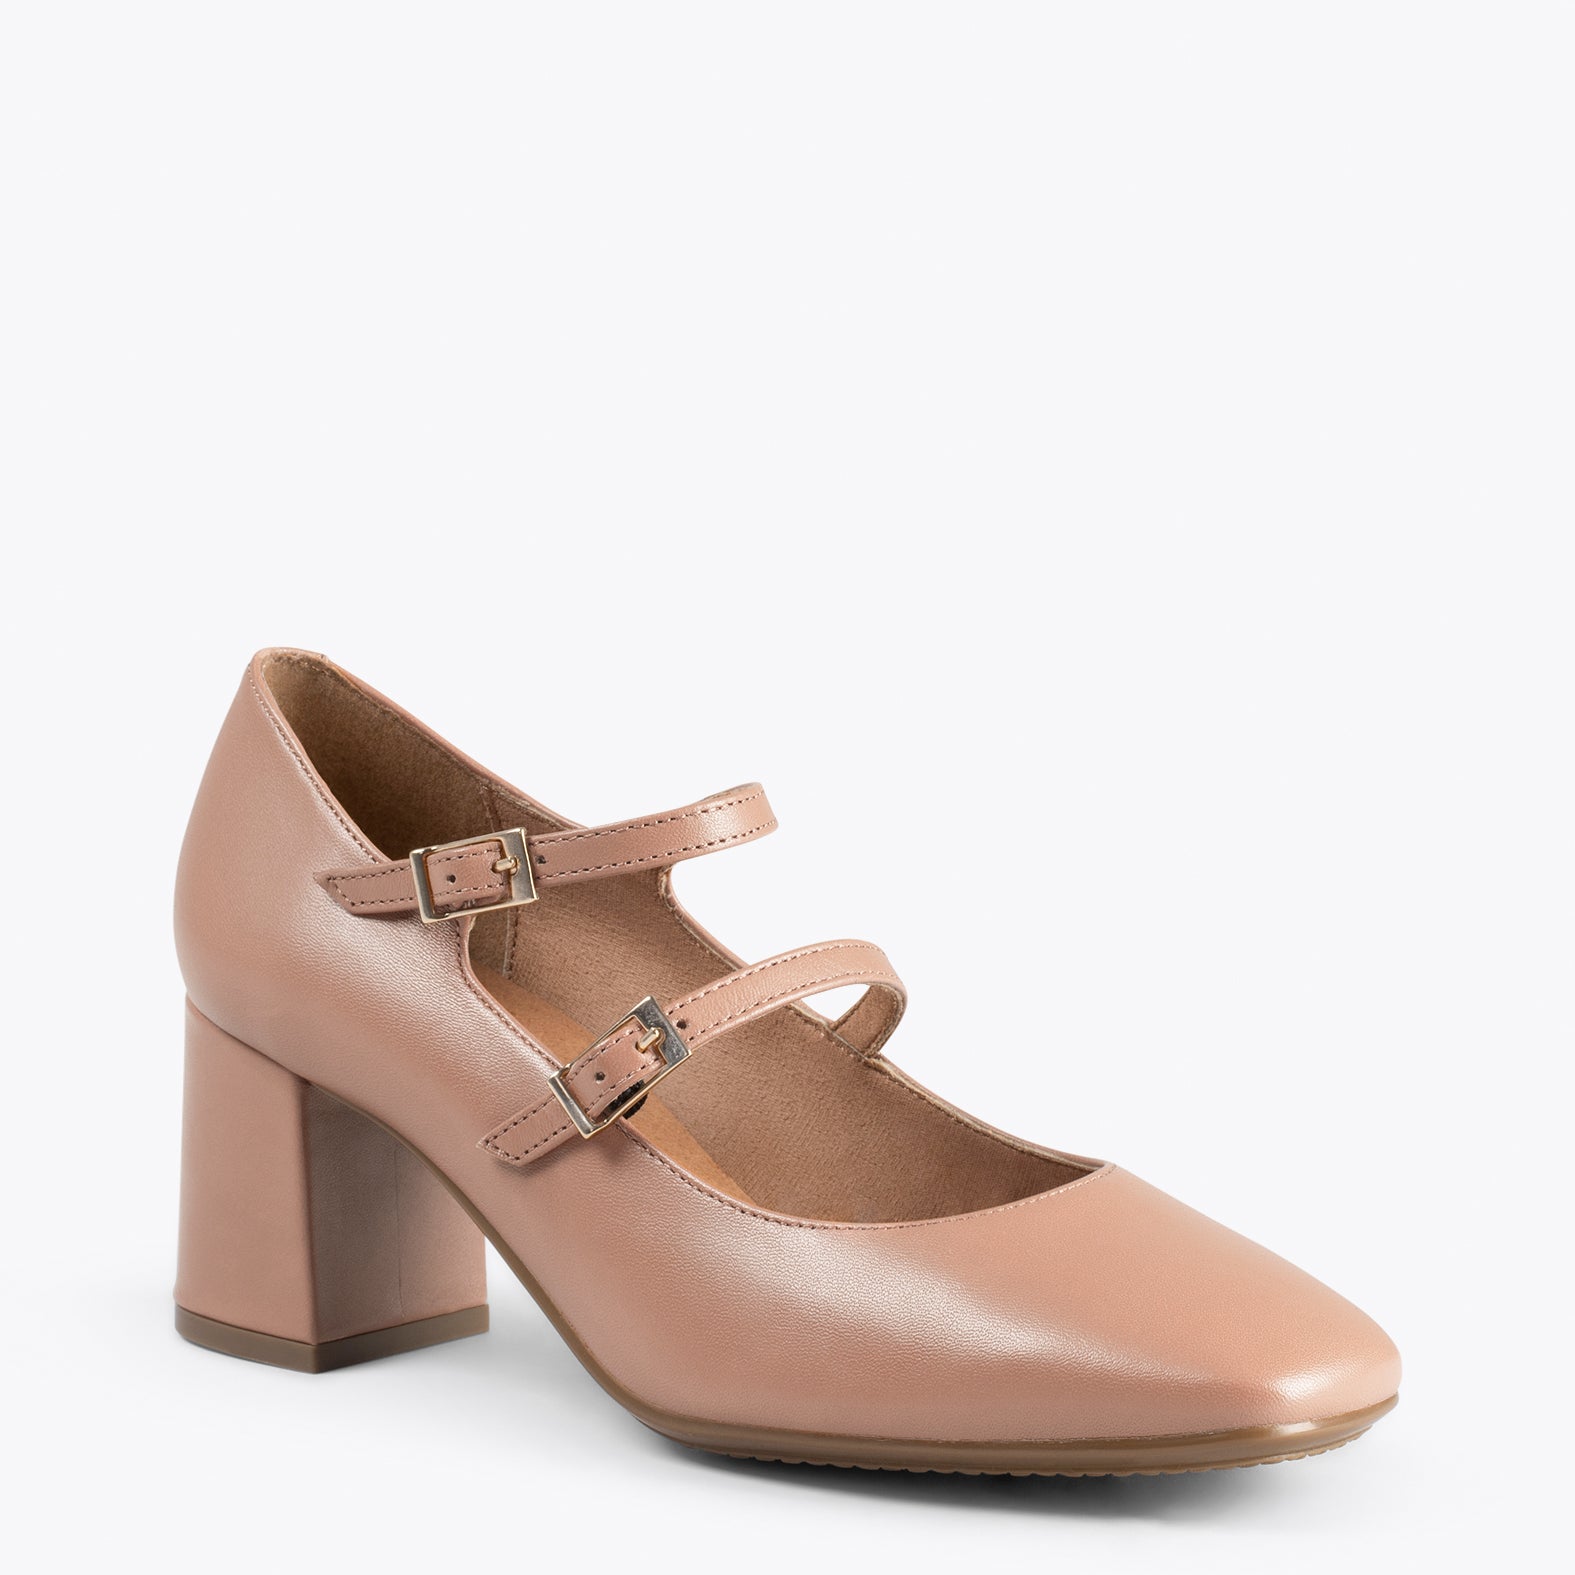 FEBRIS – NUDE nappa leather heel with straps